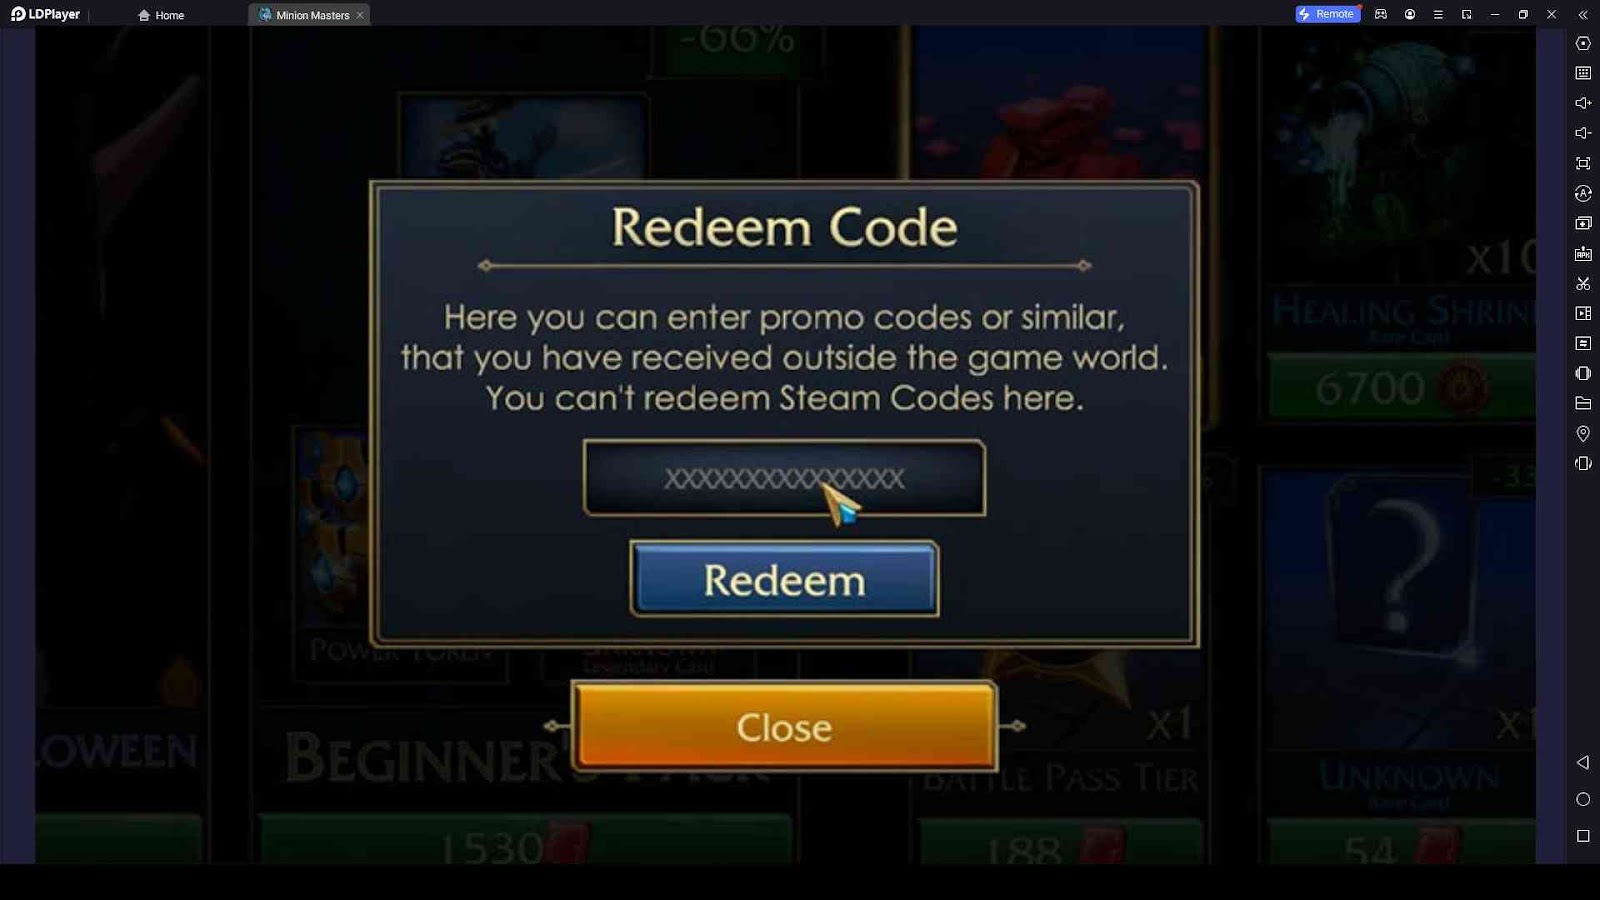 Redeeming Process for the Codes